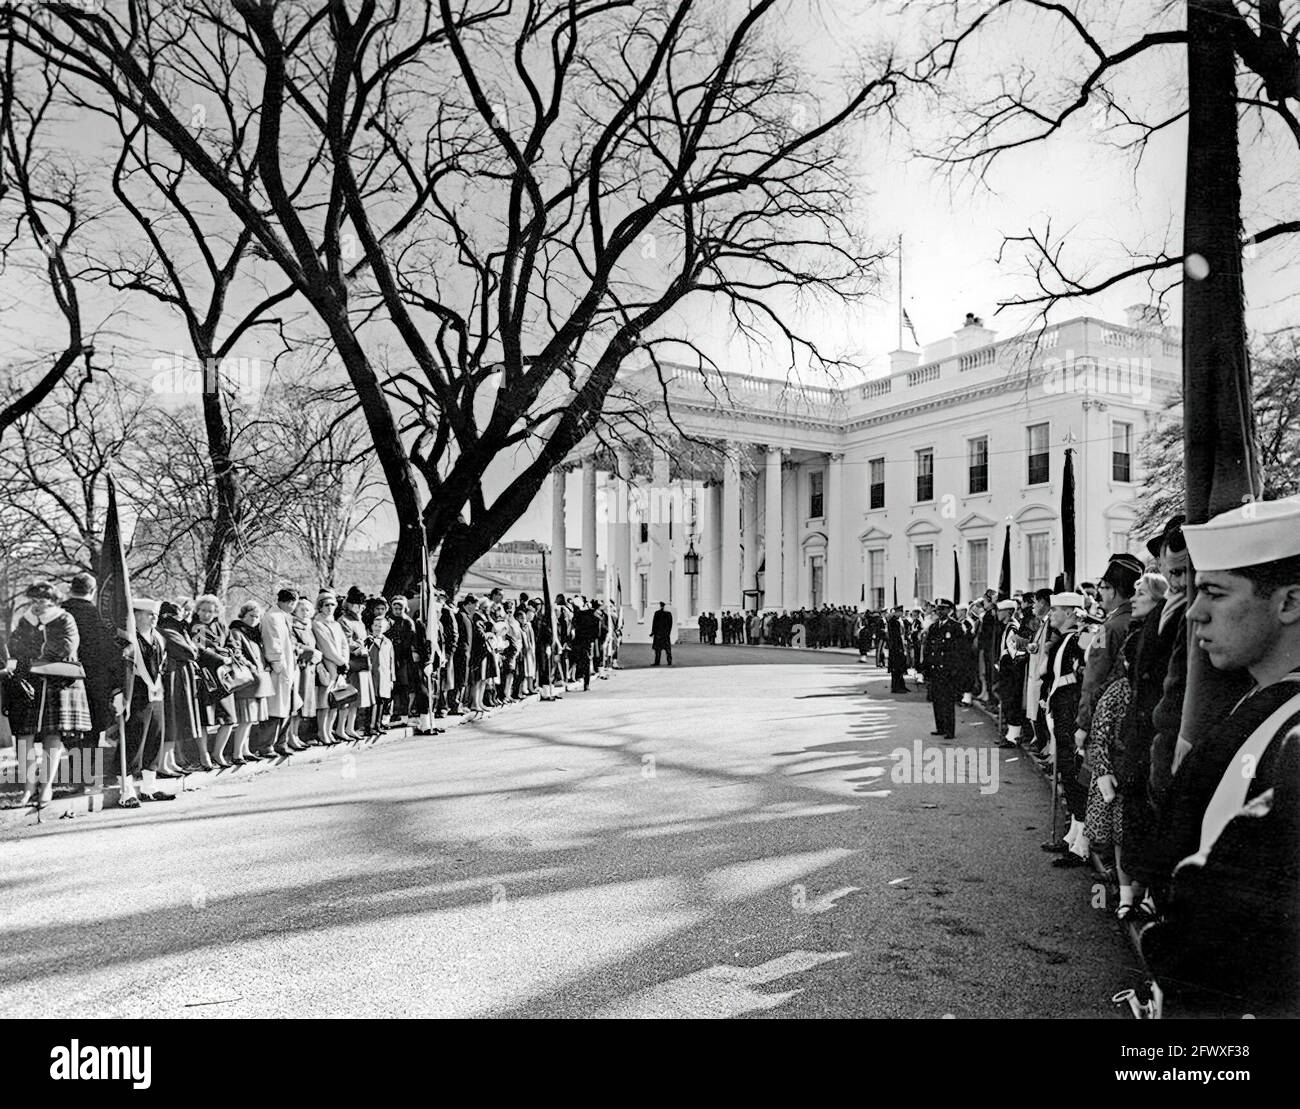 November 1963  Mourners and members of the color guard line the North Lawn driveway of the White House for the funeral procession of President John F. Kennedy to the Cathedral of St. Matthew the Apostle. Washington, D.C. Abbie Rowe. White House Photographs. Stock Photo